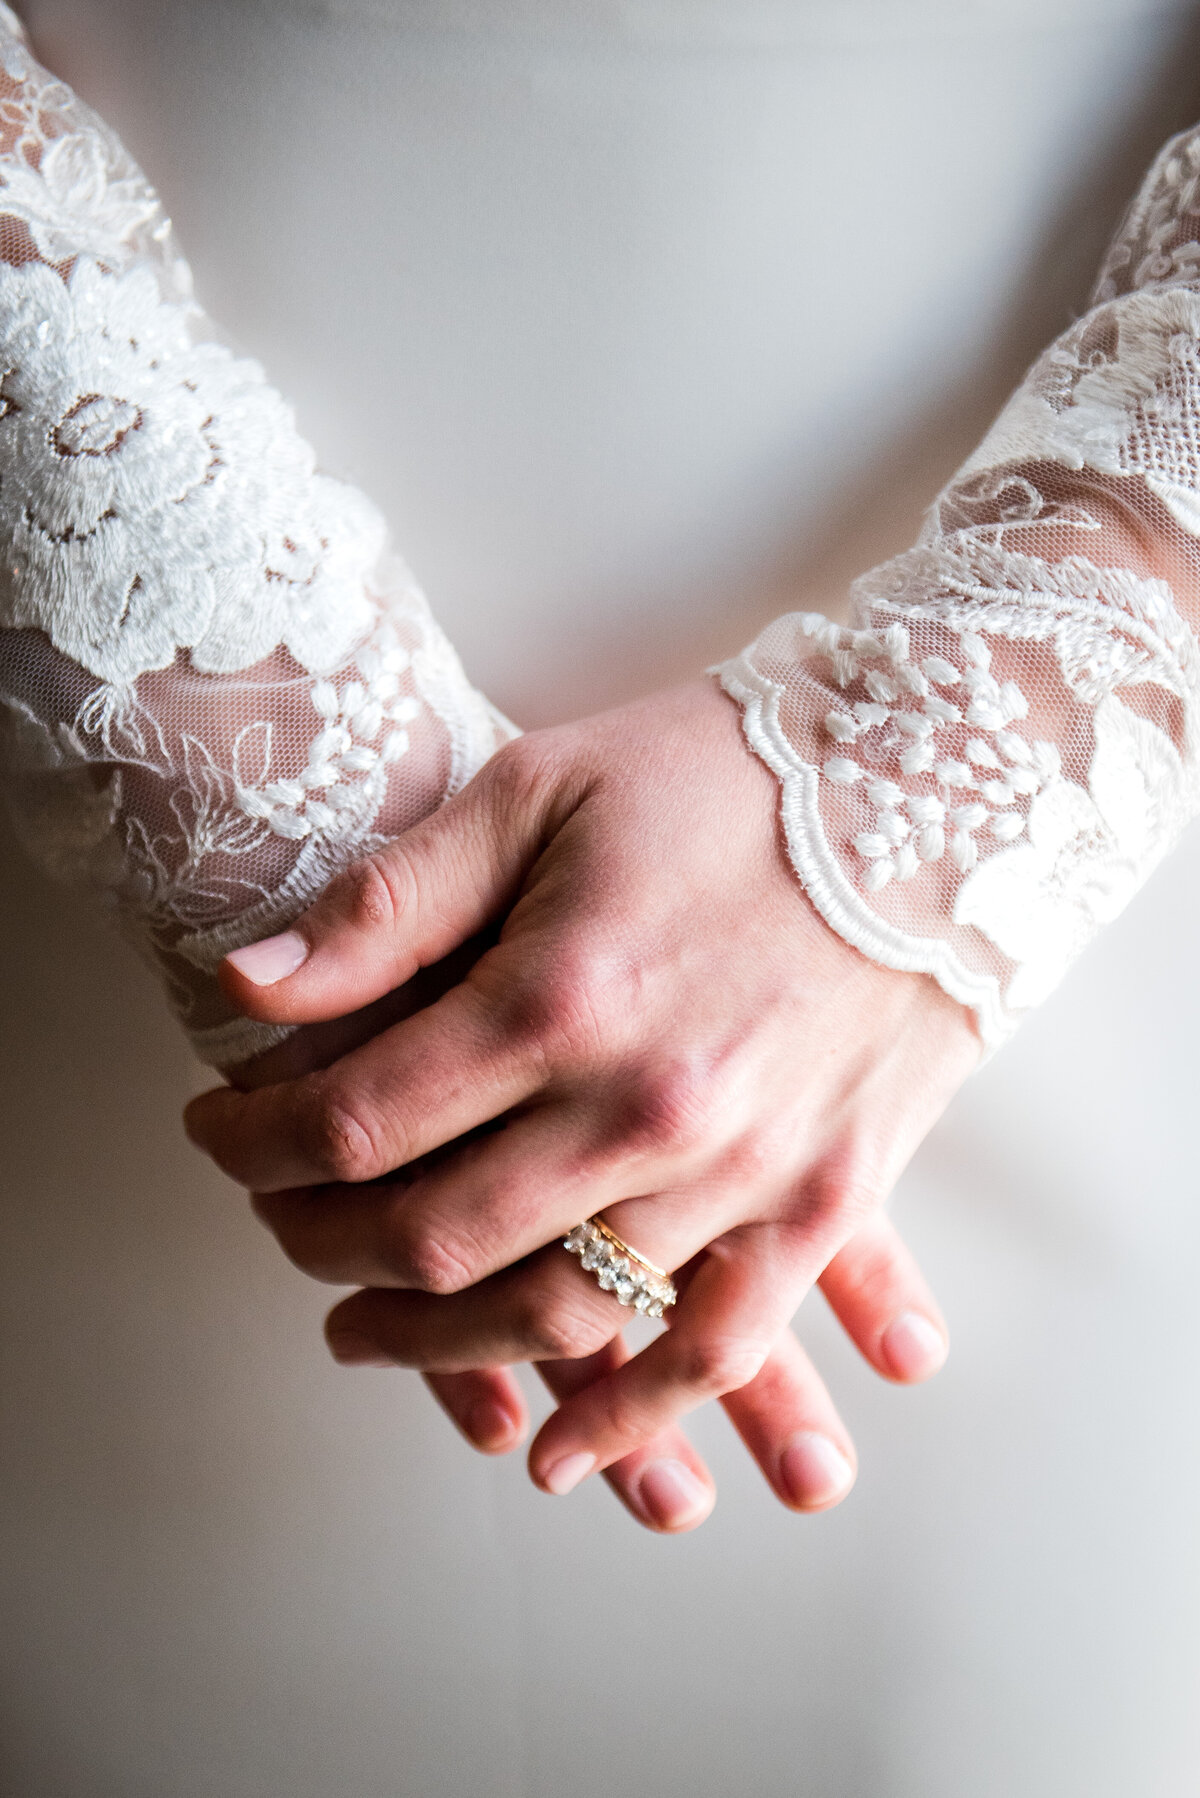 A close up shot of a bride's hands, showing her wedding rings and lacy wedding sleeves.